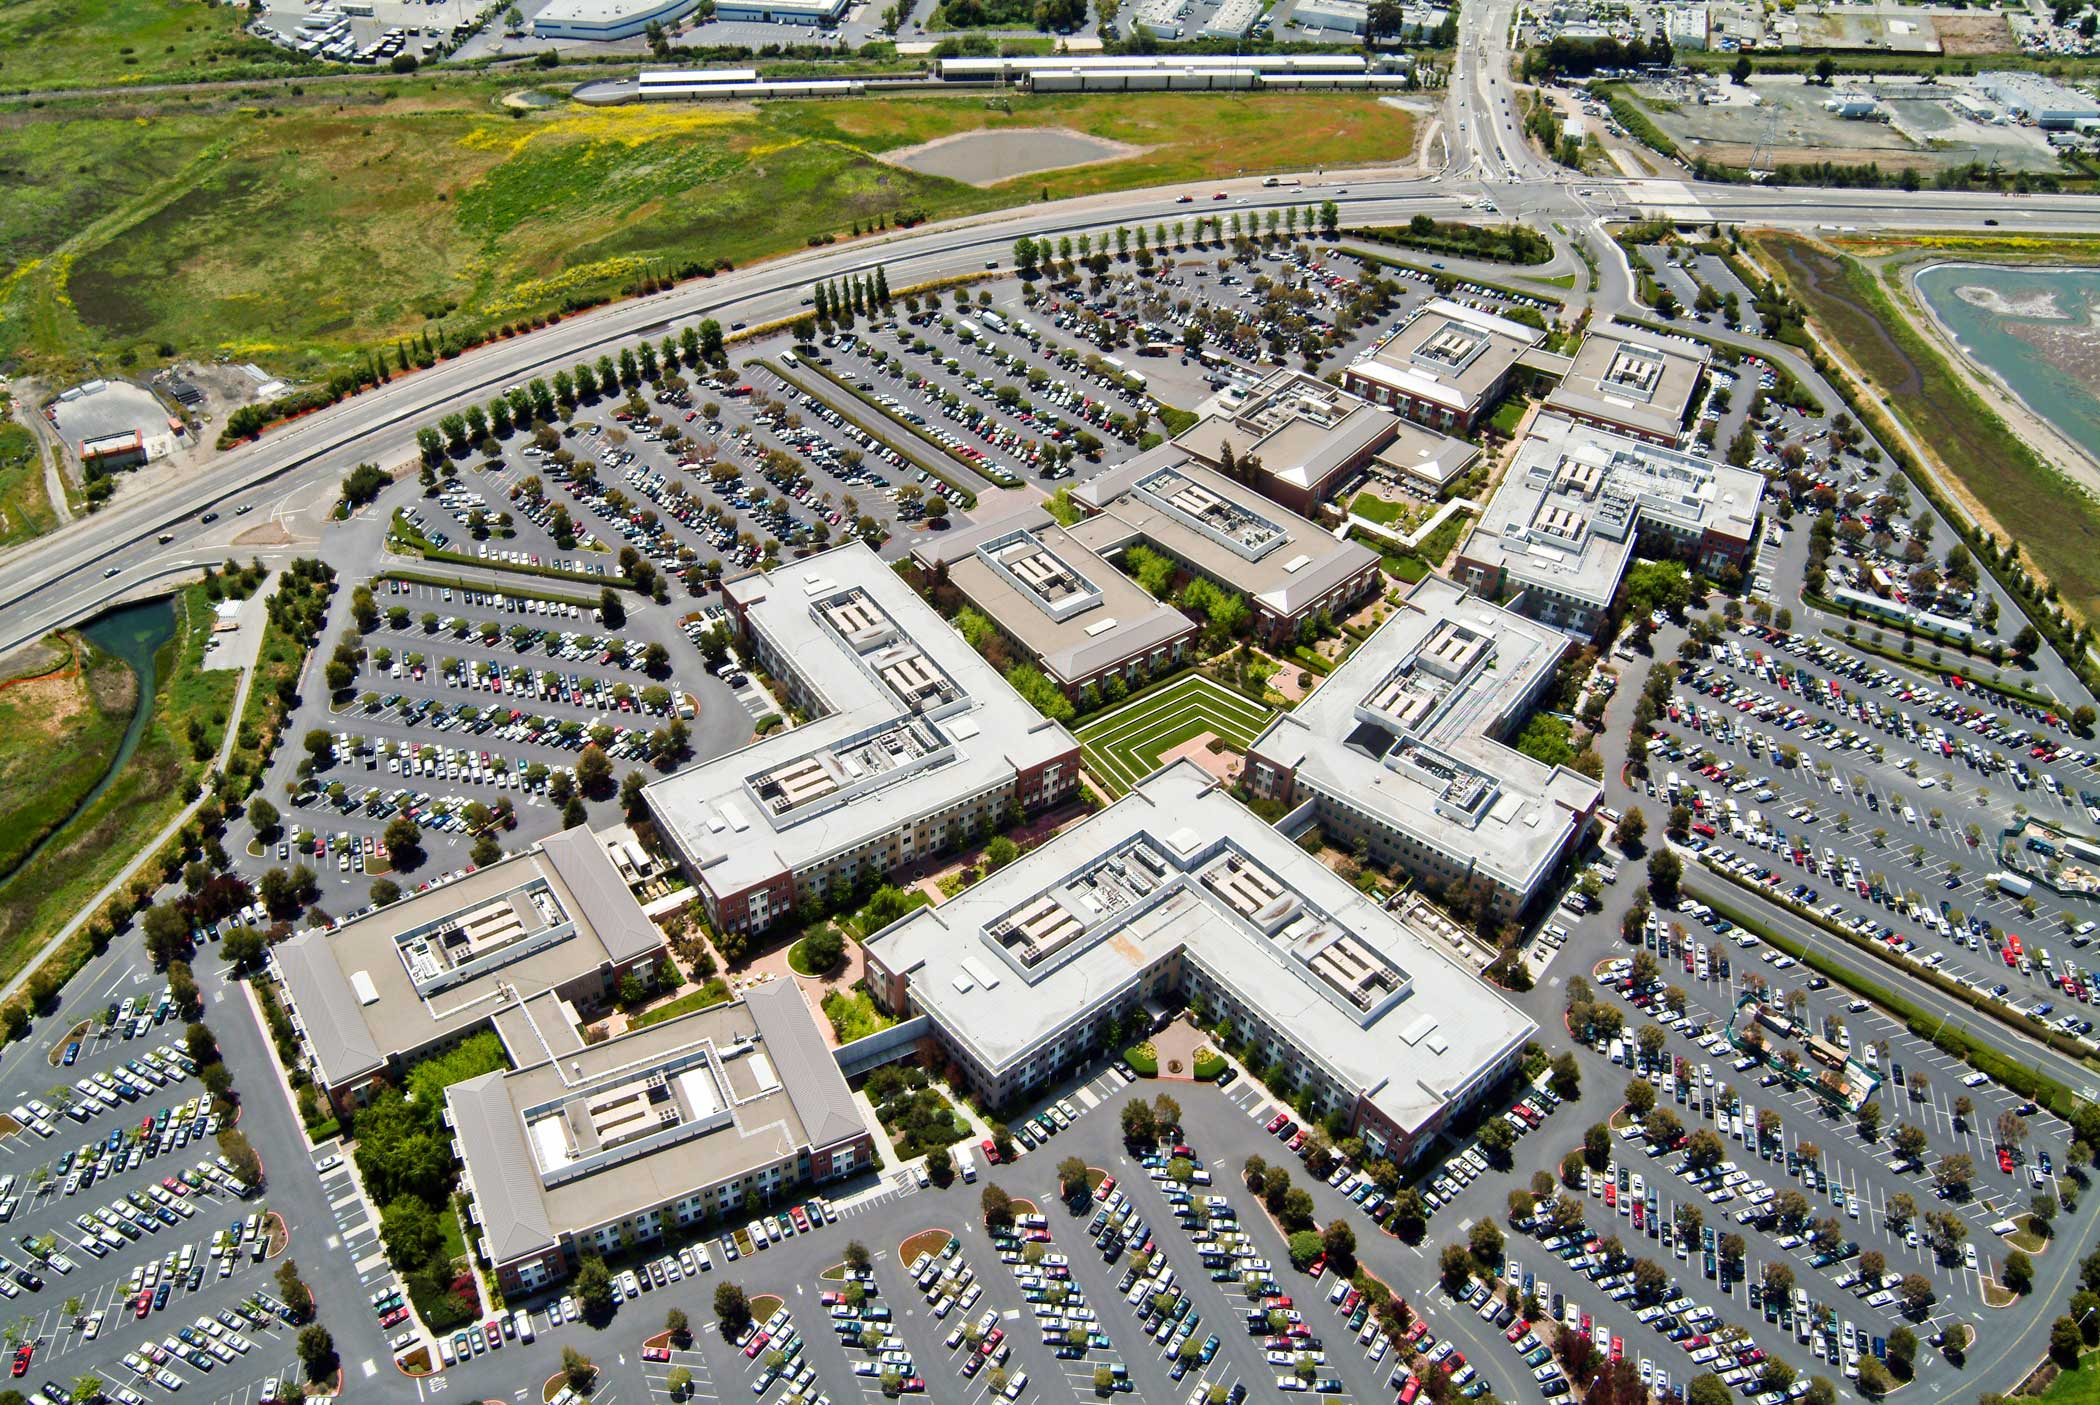 Main Headquarters: An aerial of Facebook's headquarters in Menlo Park, CA on the San Francisco Bay.